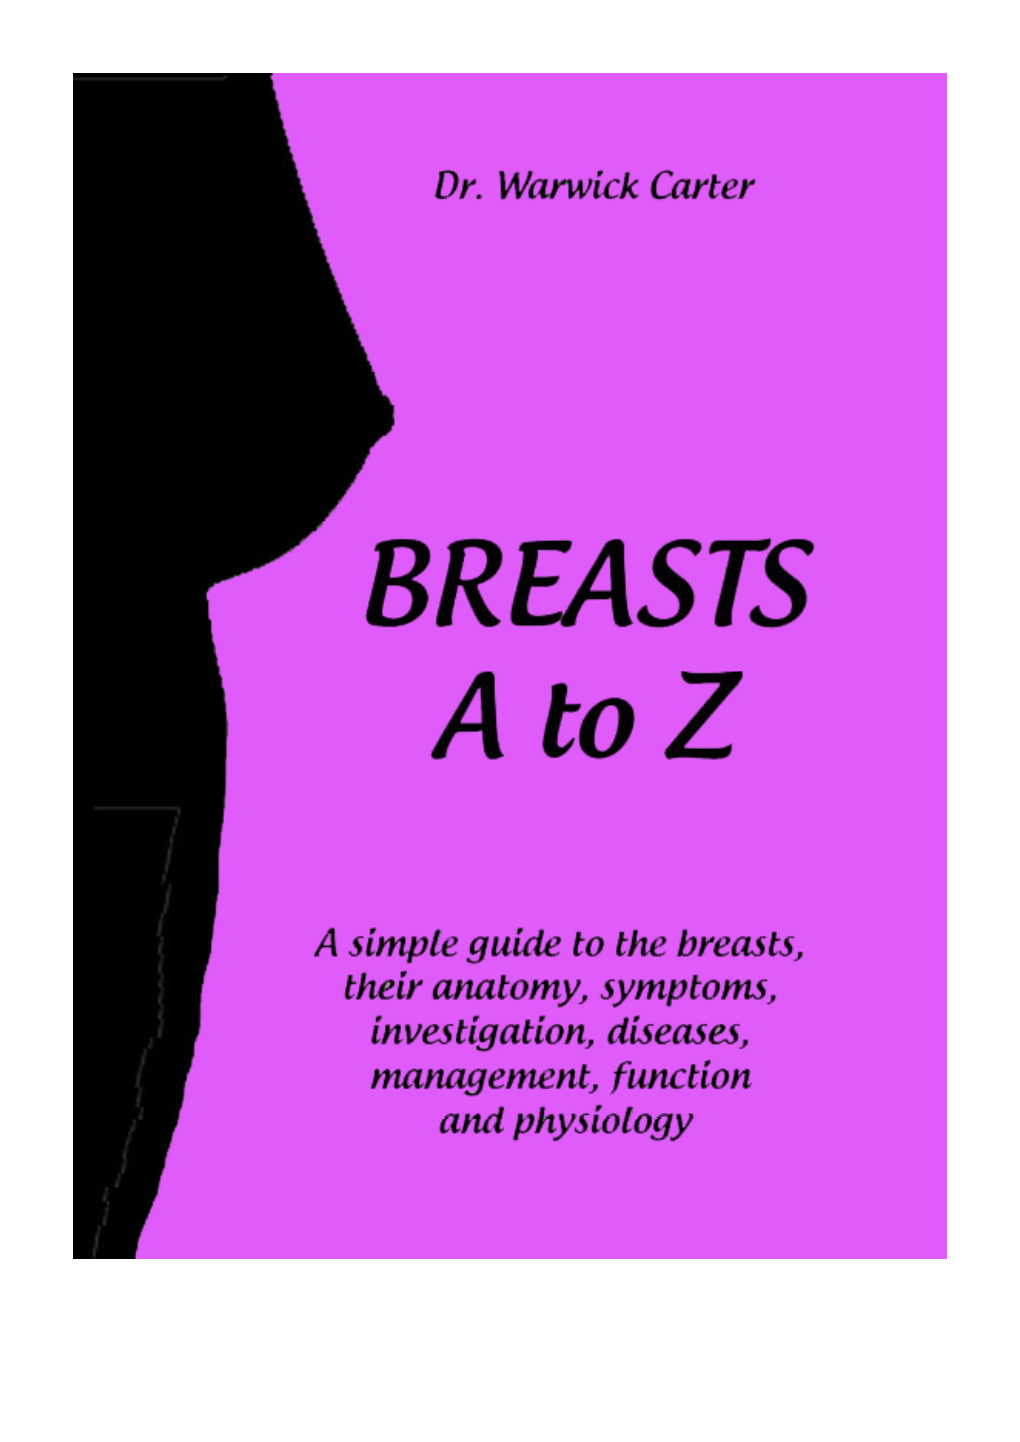 BREASTS a to Z